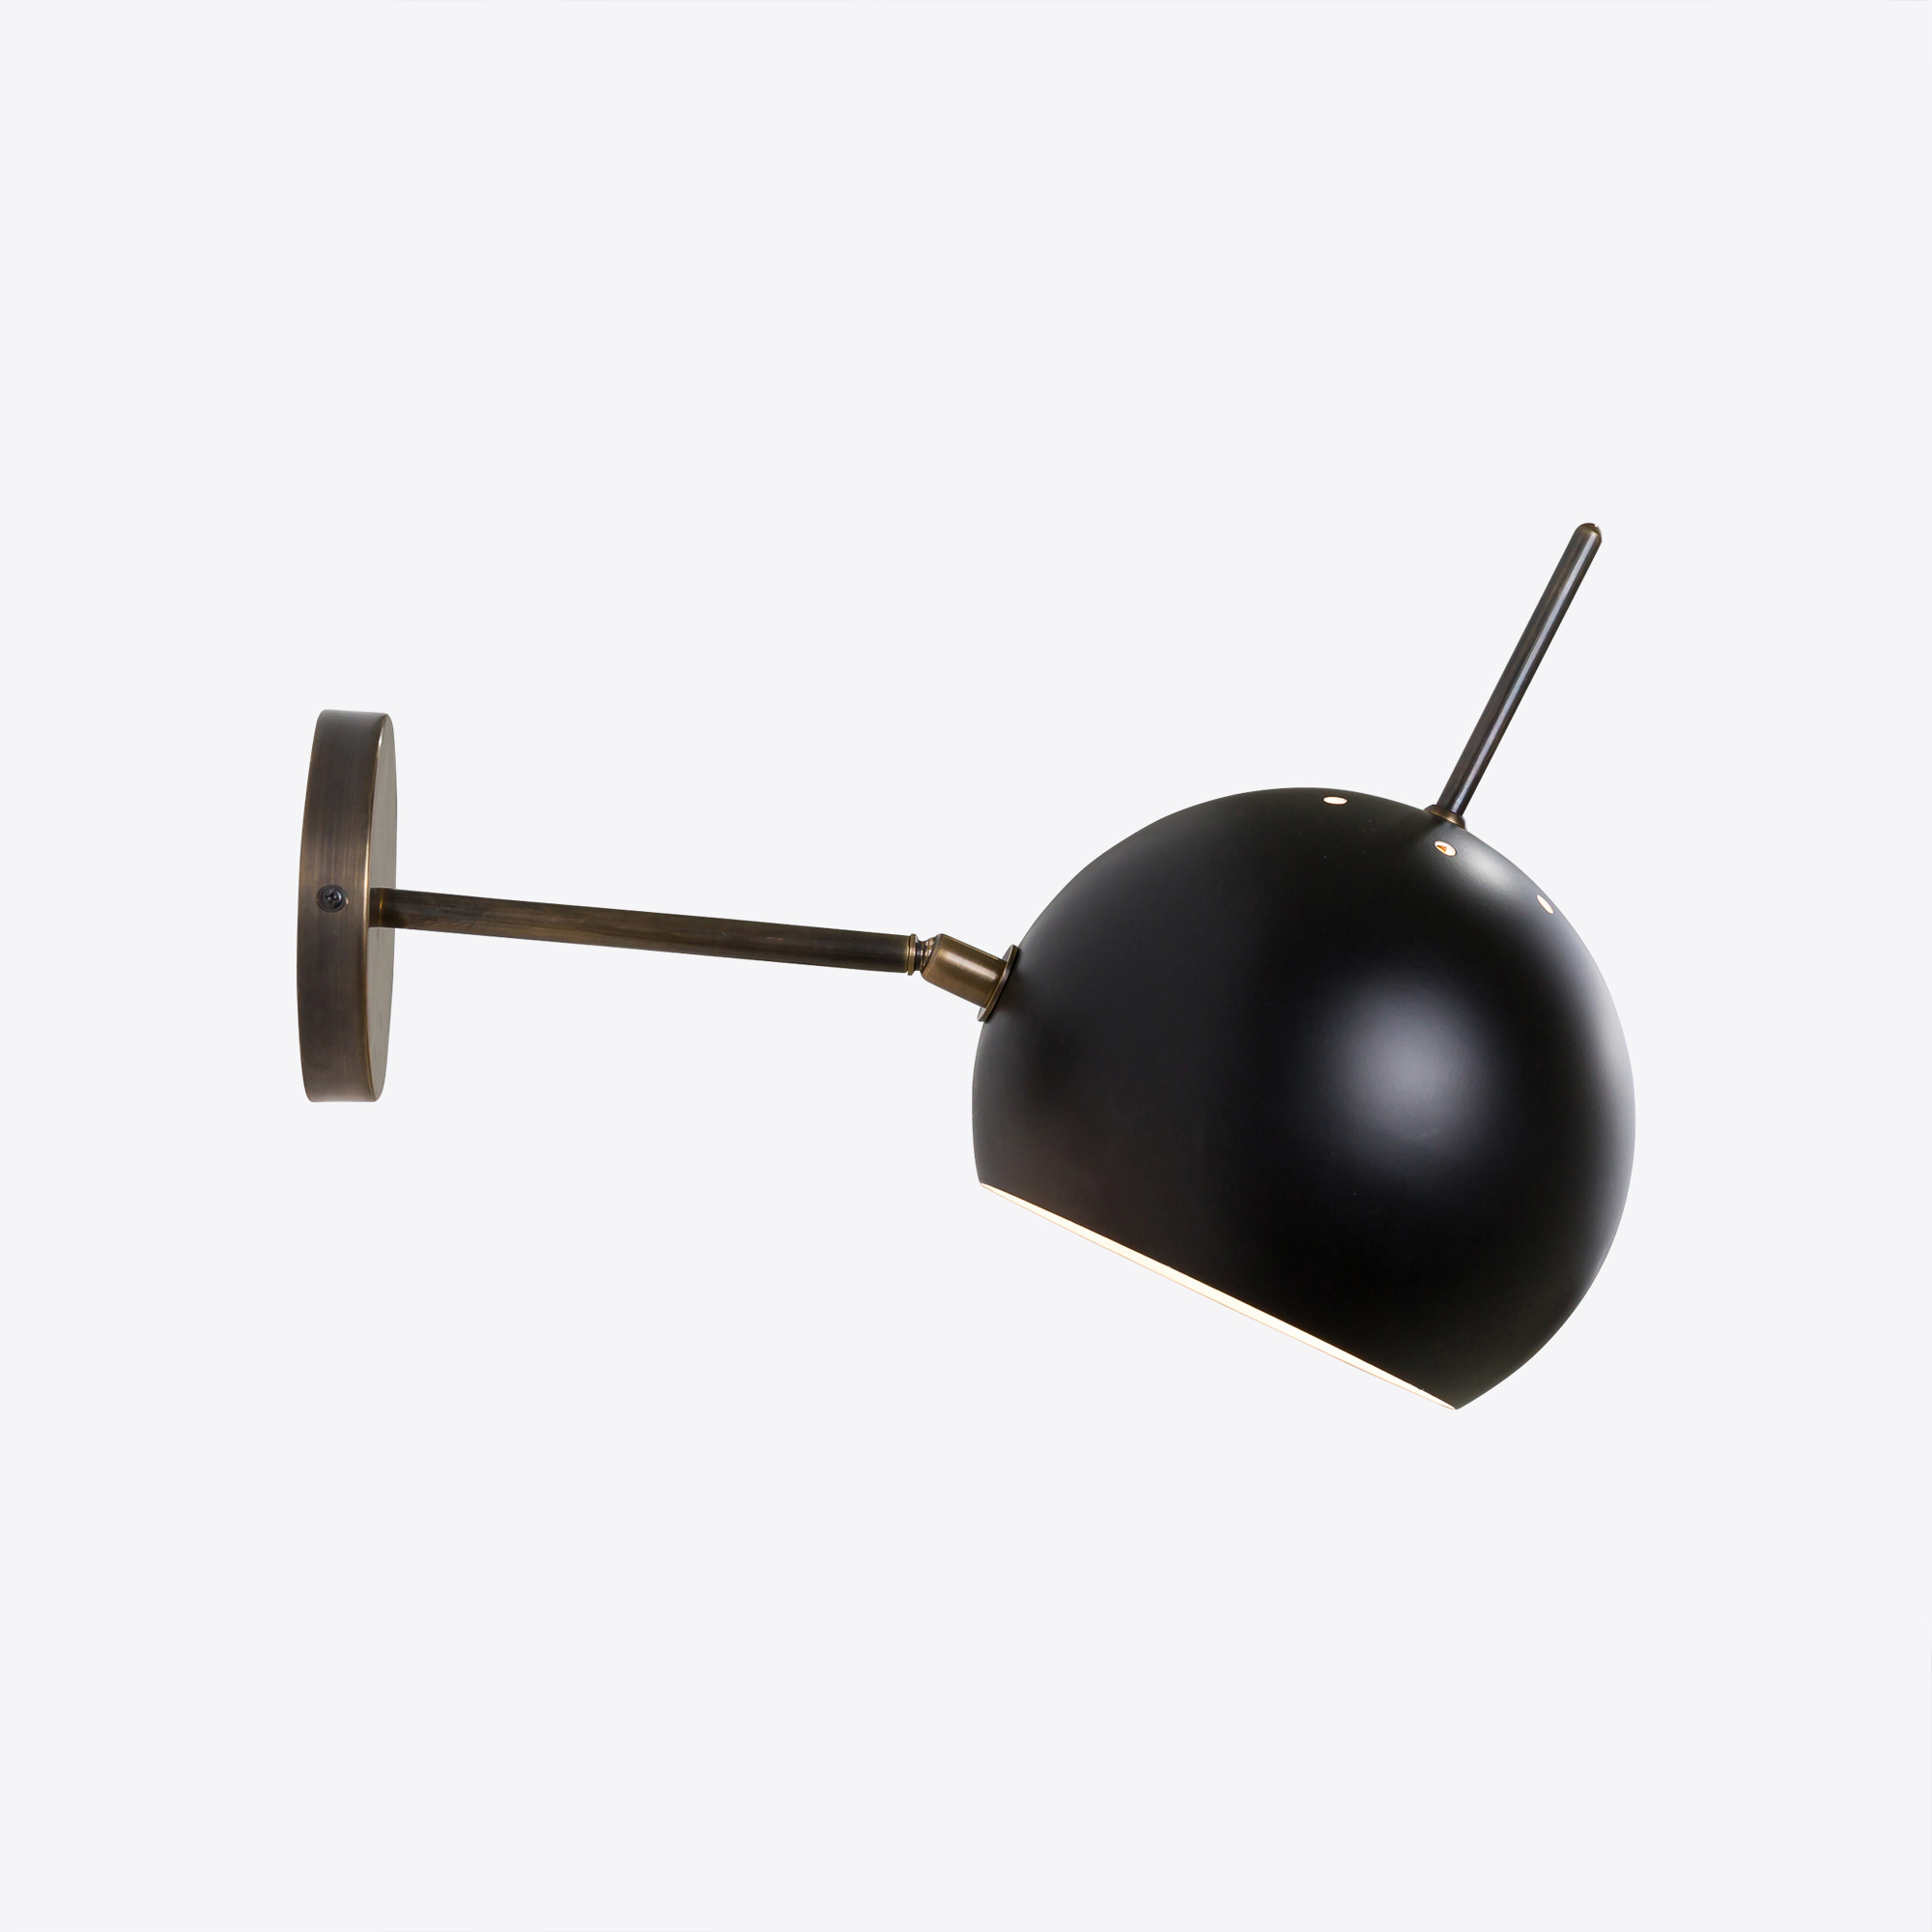 Ponti black globe wall light in mid-century style - adjustable directional bedside or desk lamp